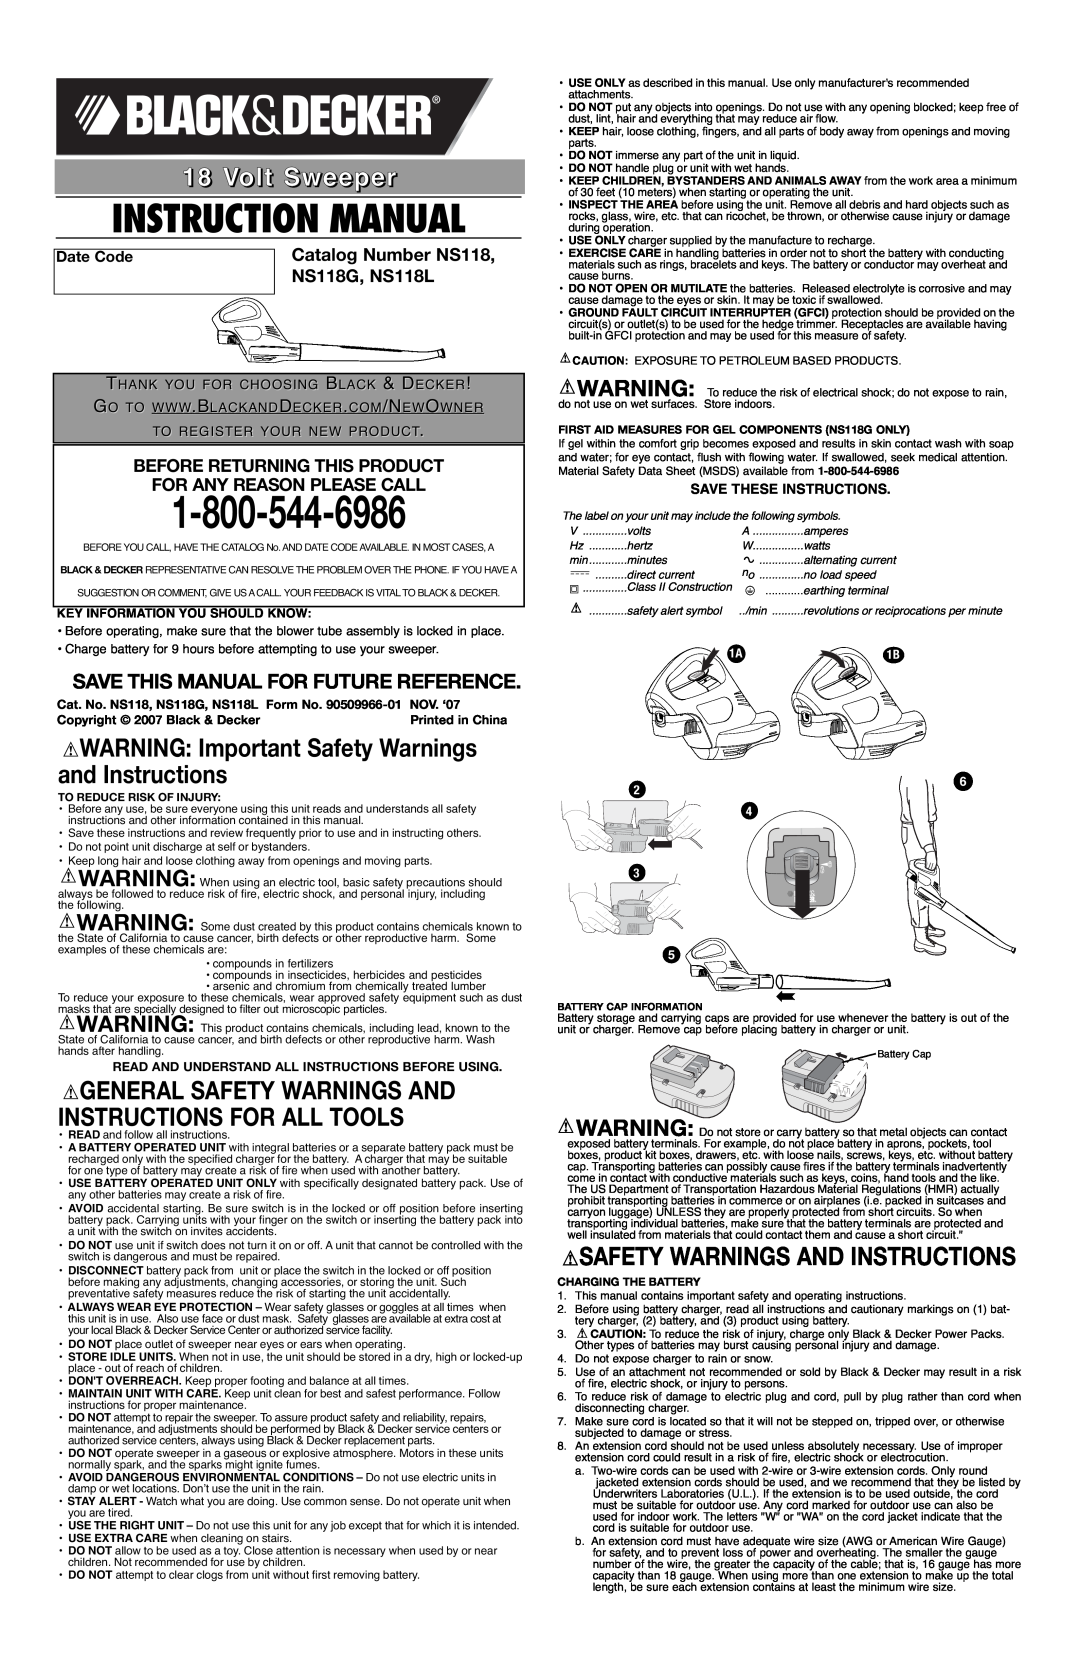 Black & Decker instruction manual WARNING Important Safety Warnings and Instructions, Date Code, NS118G, NS118L, Sept 